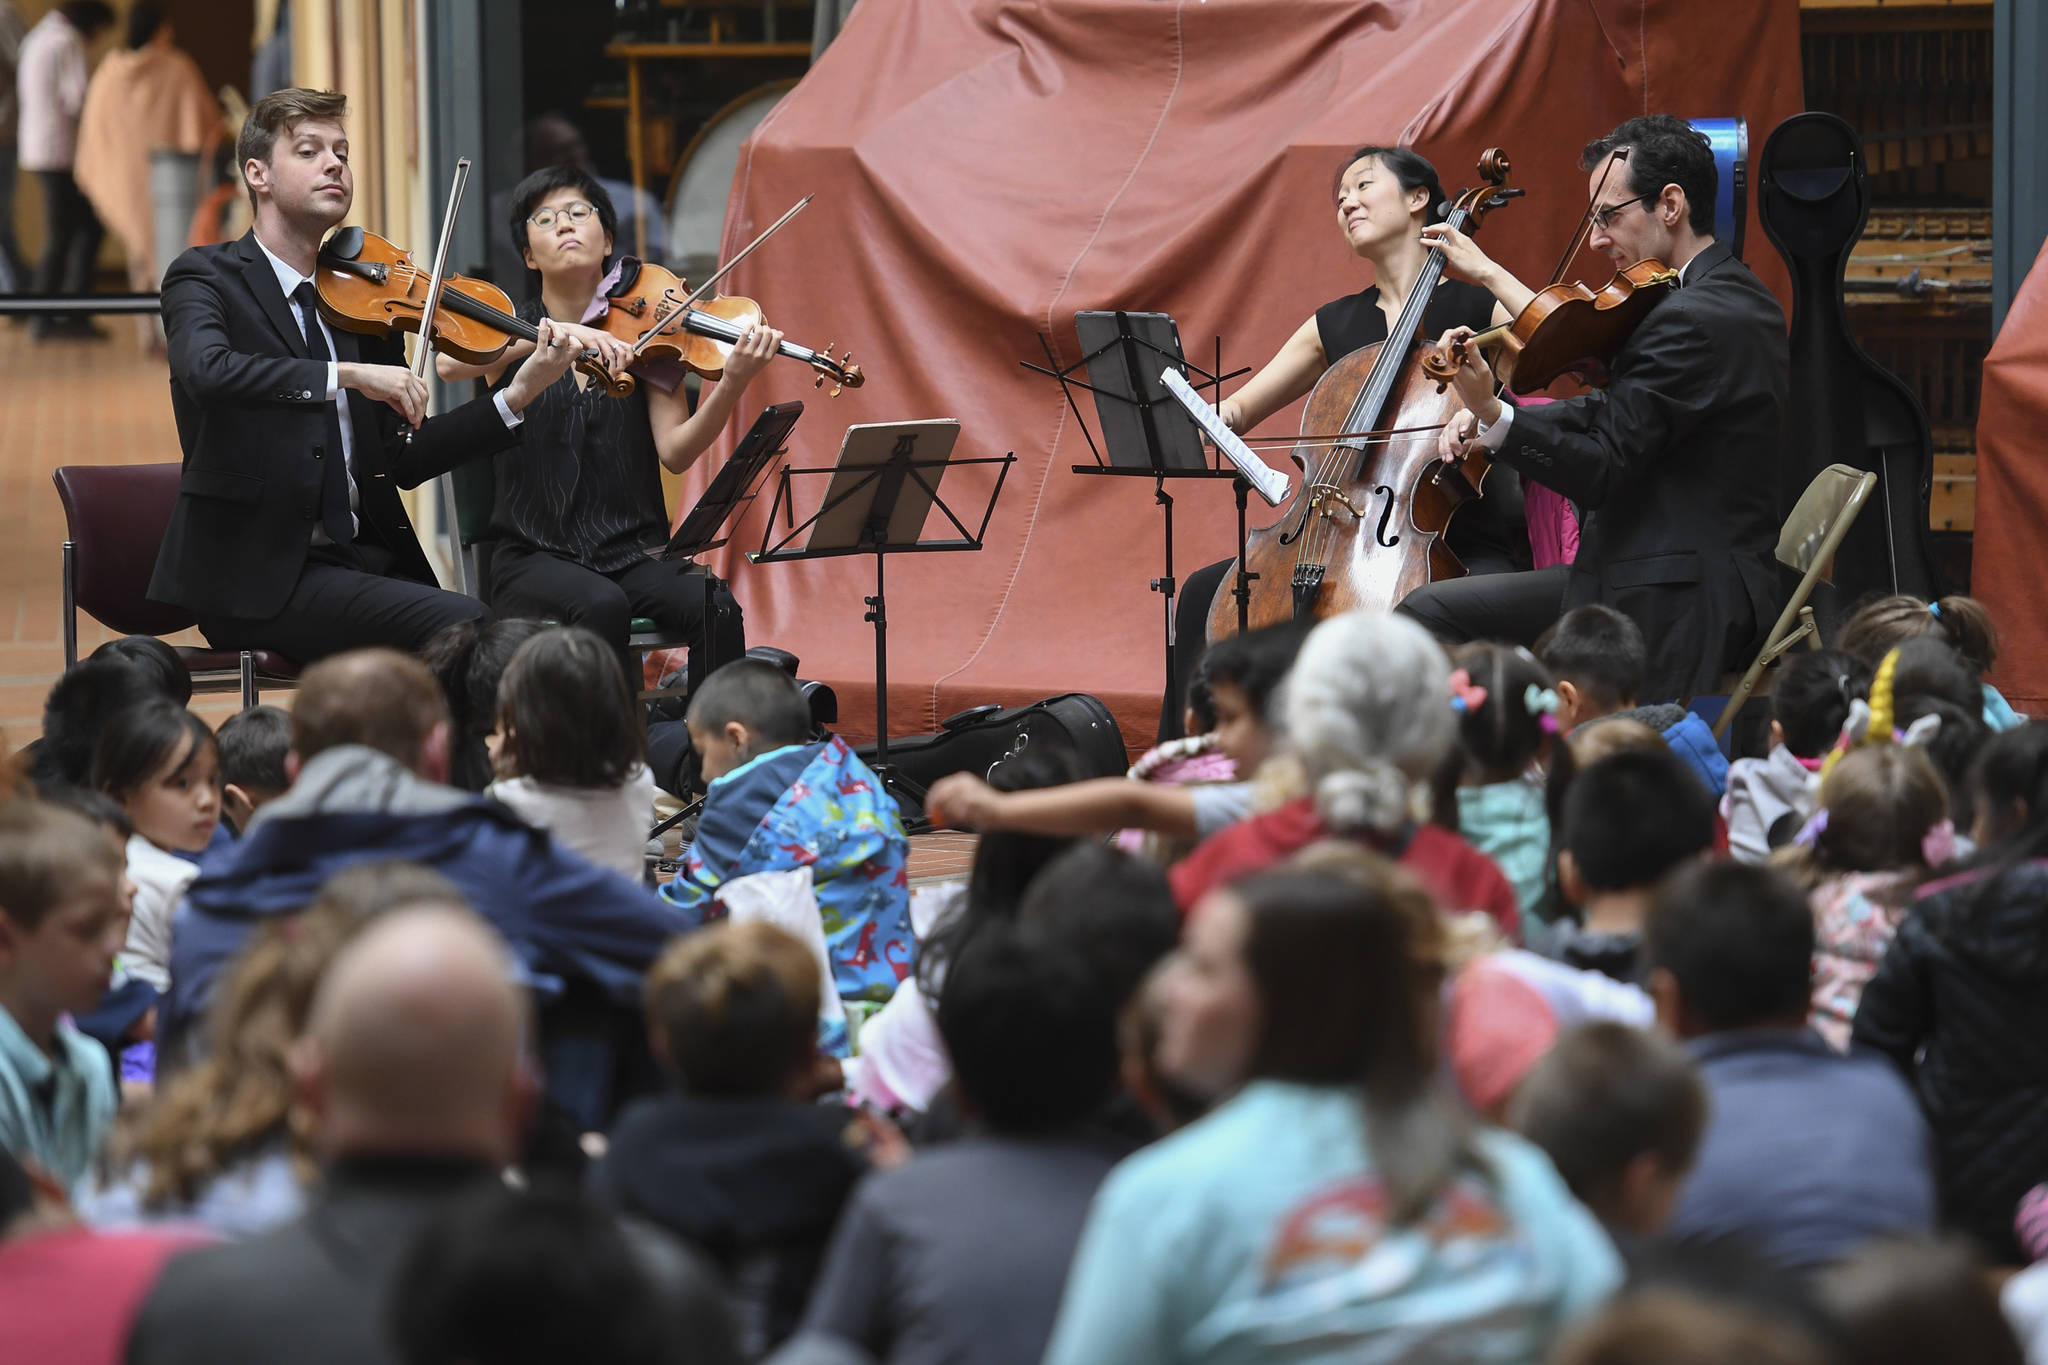 Members of the Argus String Quartet play a Brown Bag Concert at the State Office Building on Wednesday, May 15, 2019, during the annual Juneau Jazz & Classics festival. (Michael Penn | Juneau Empire File)